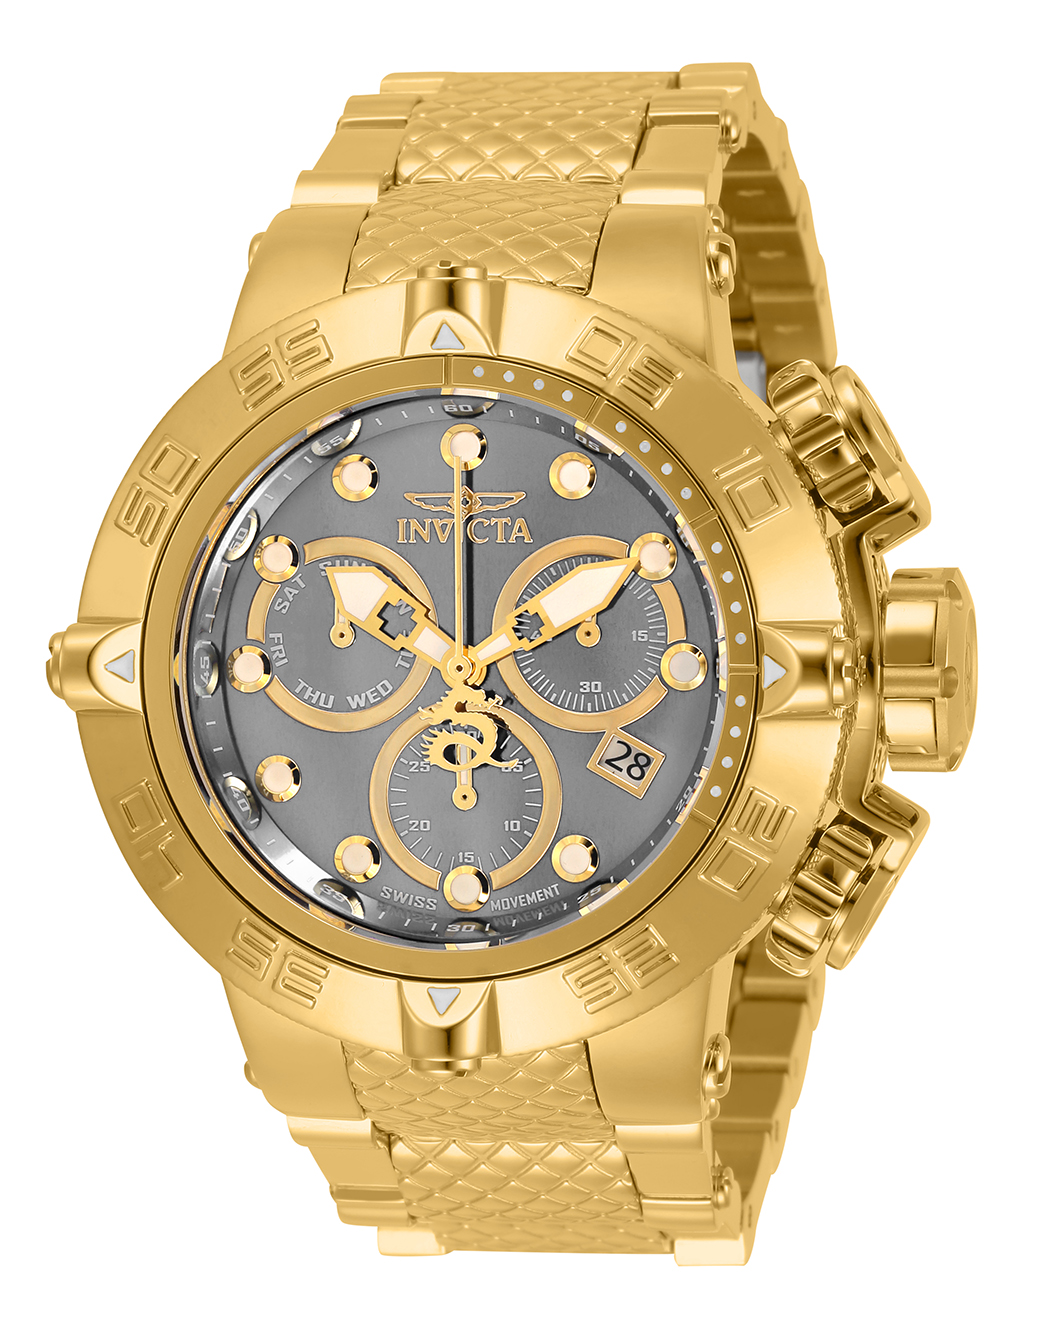 Invicta Subaqua Quartz Mens Watch - 50mm Stainless Steel Case, Stainless Steel Band, Gold (32973)